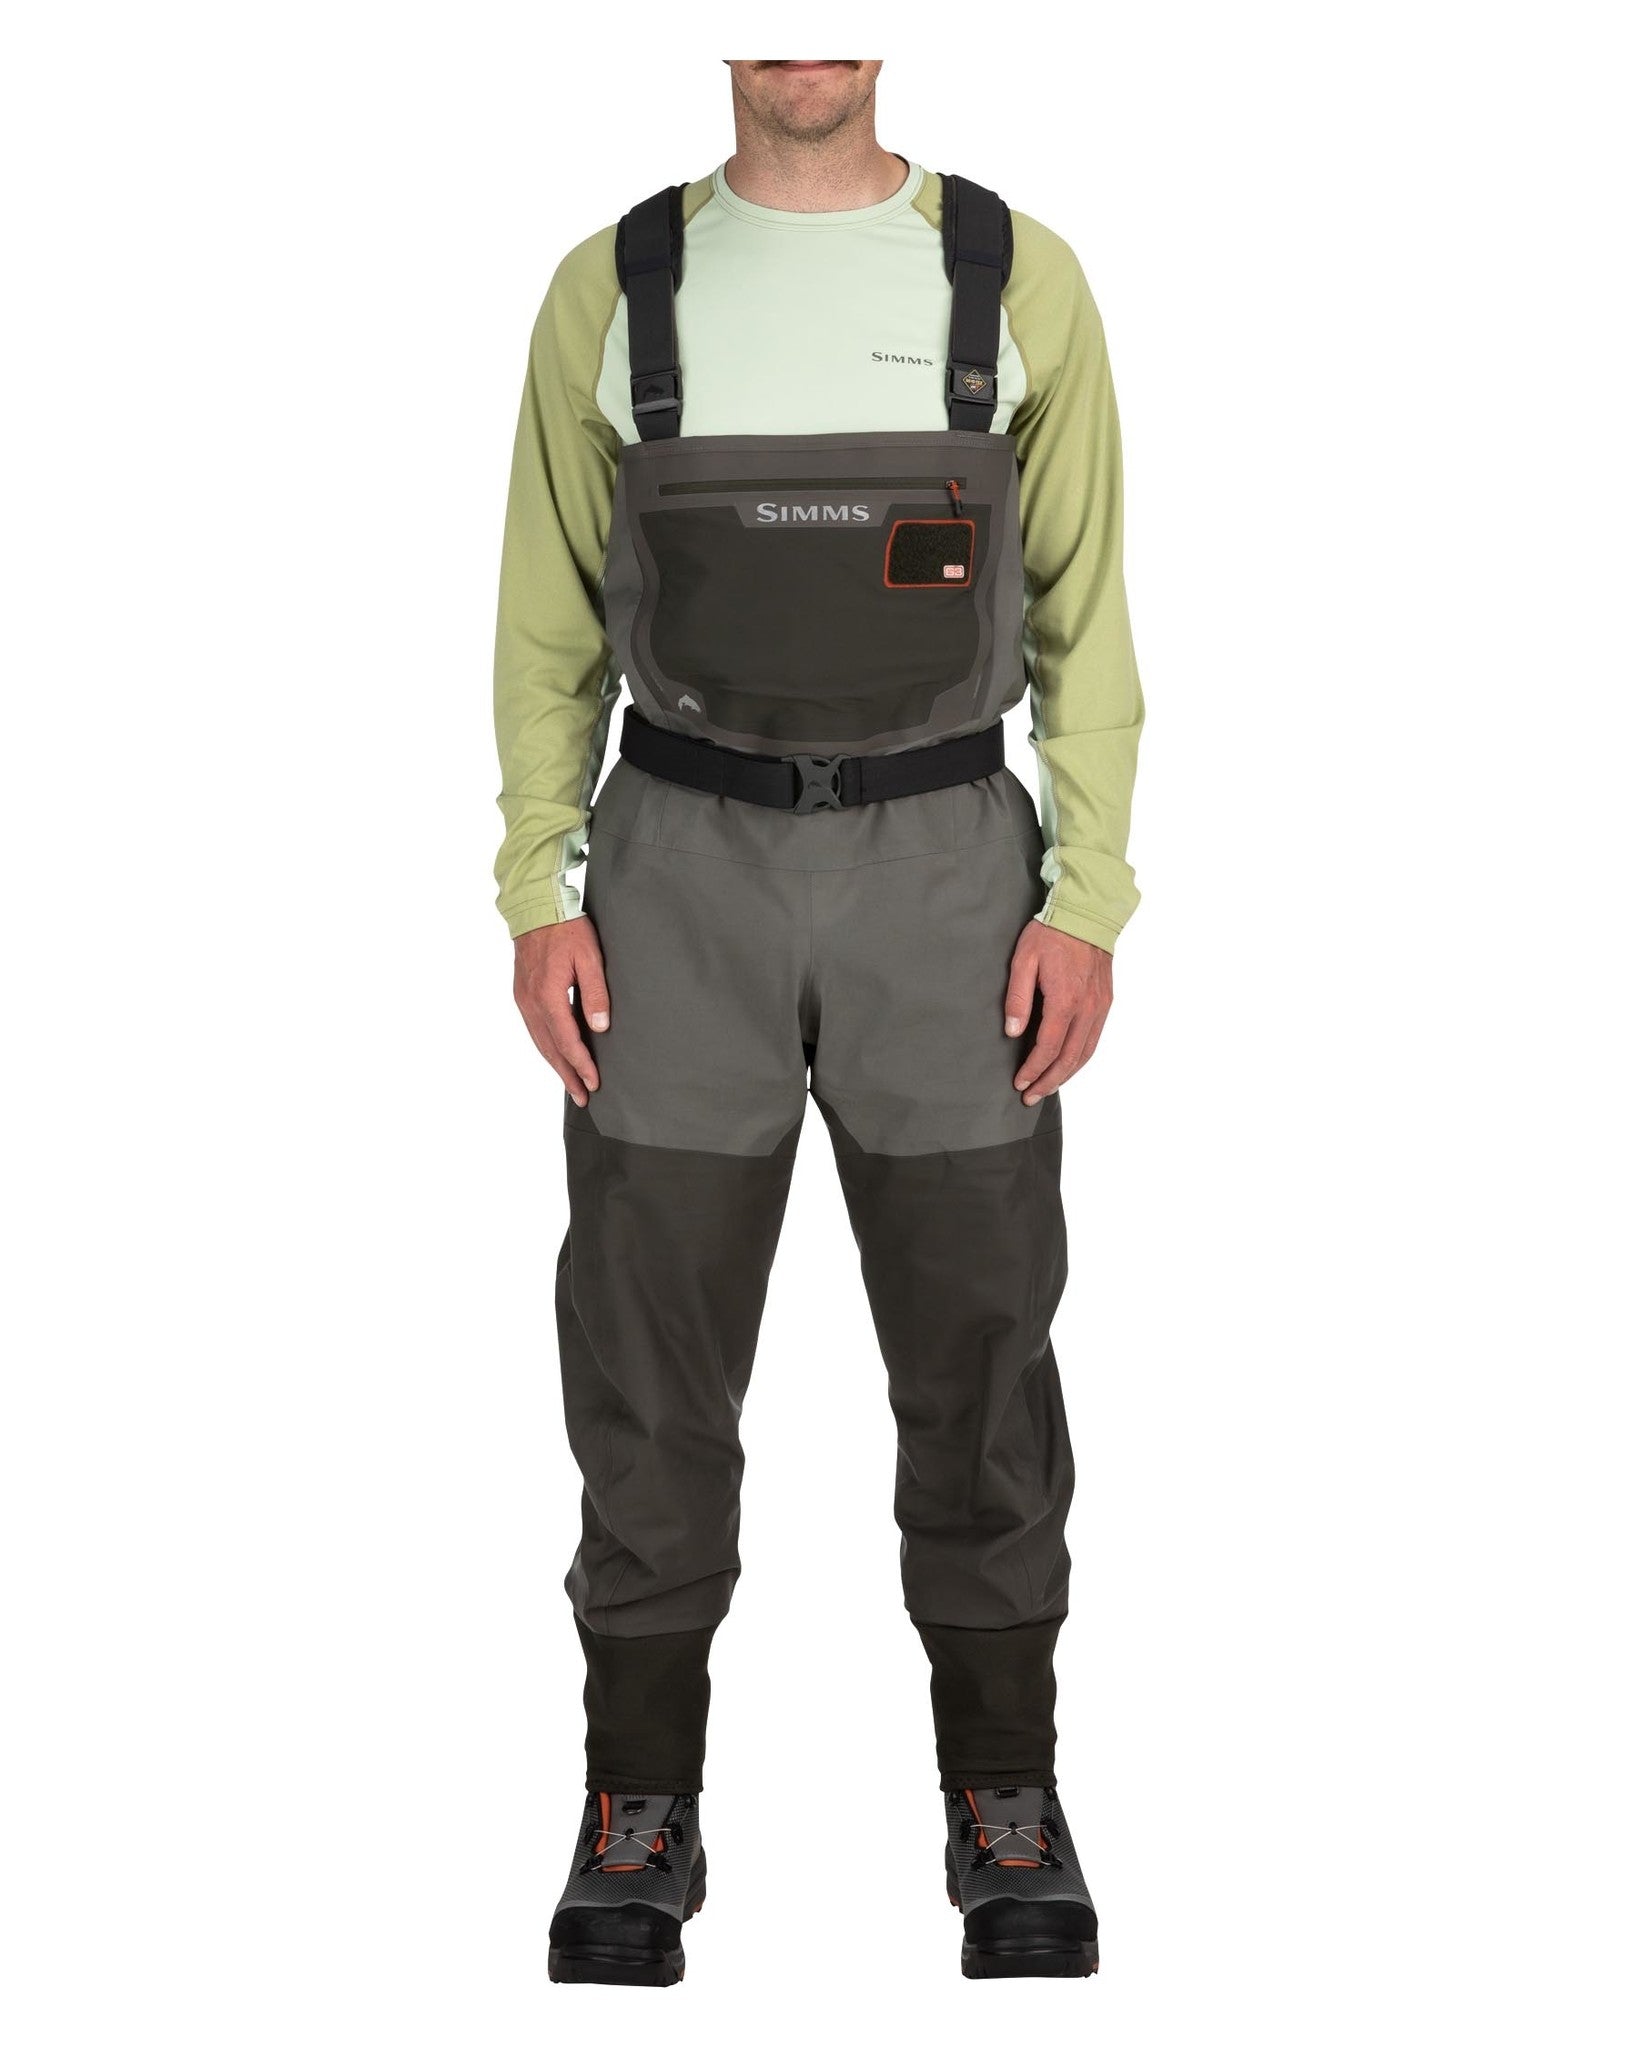 SIMMS G3 GUIDE STOCKINGFOOT WADERS - NEW FOR 2022!